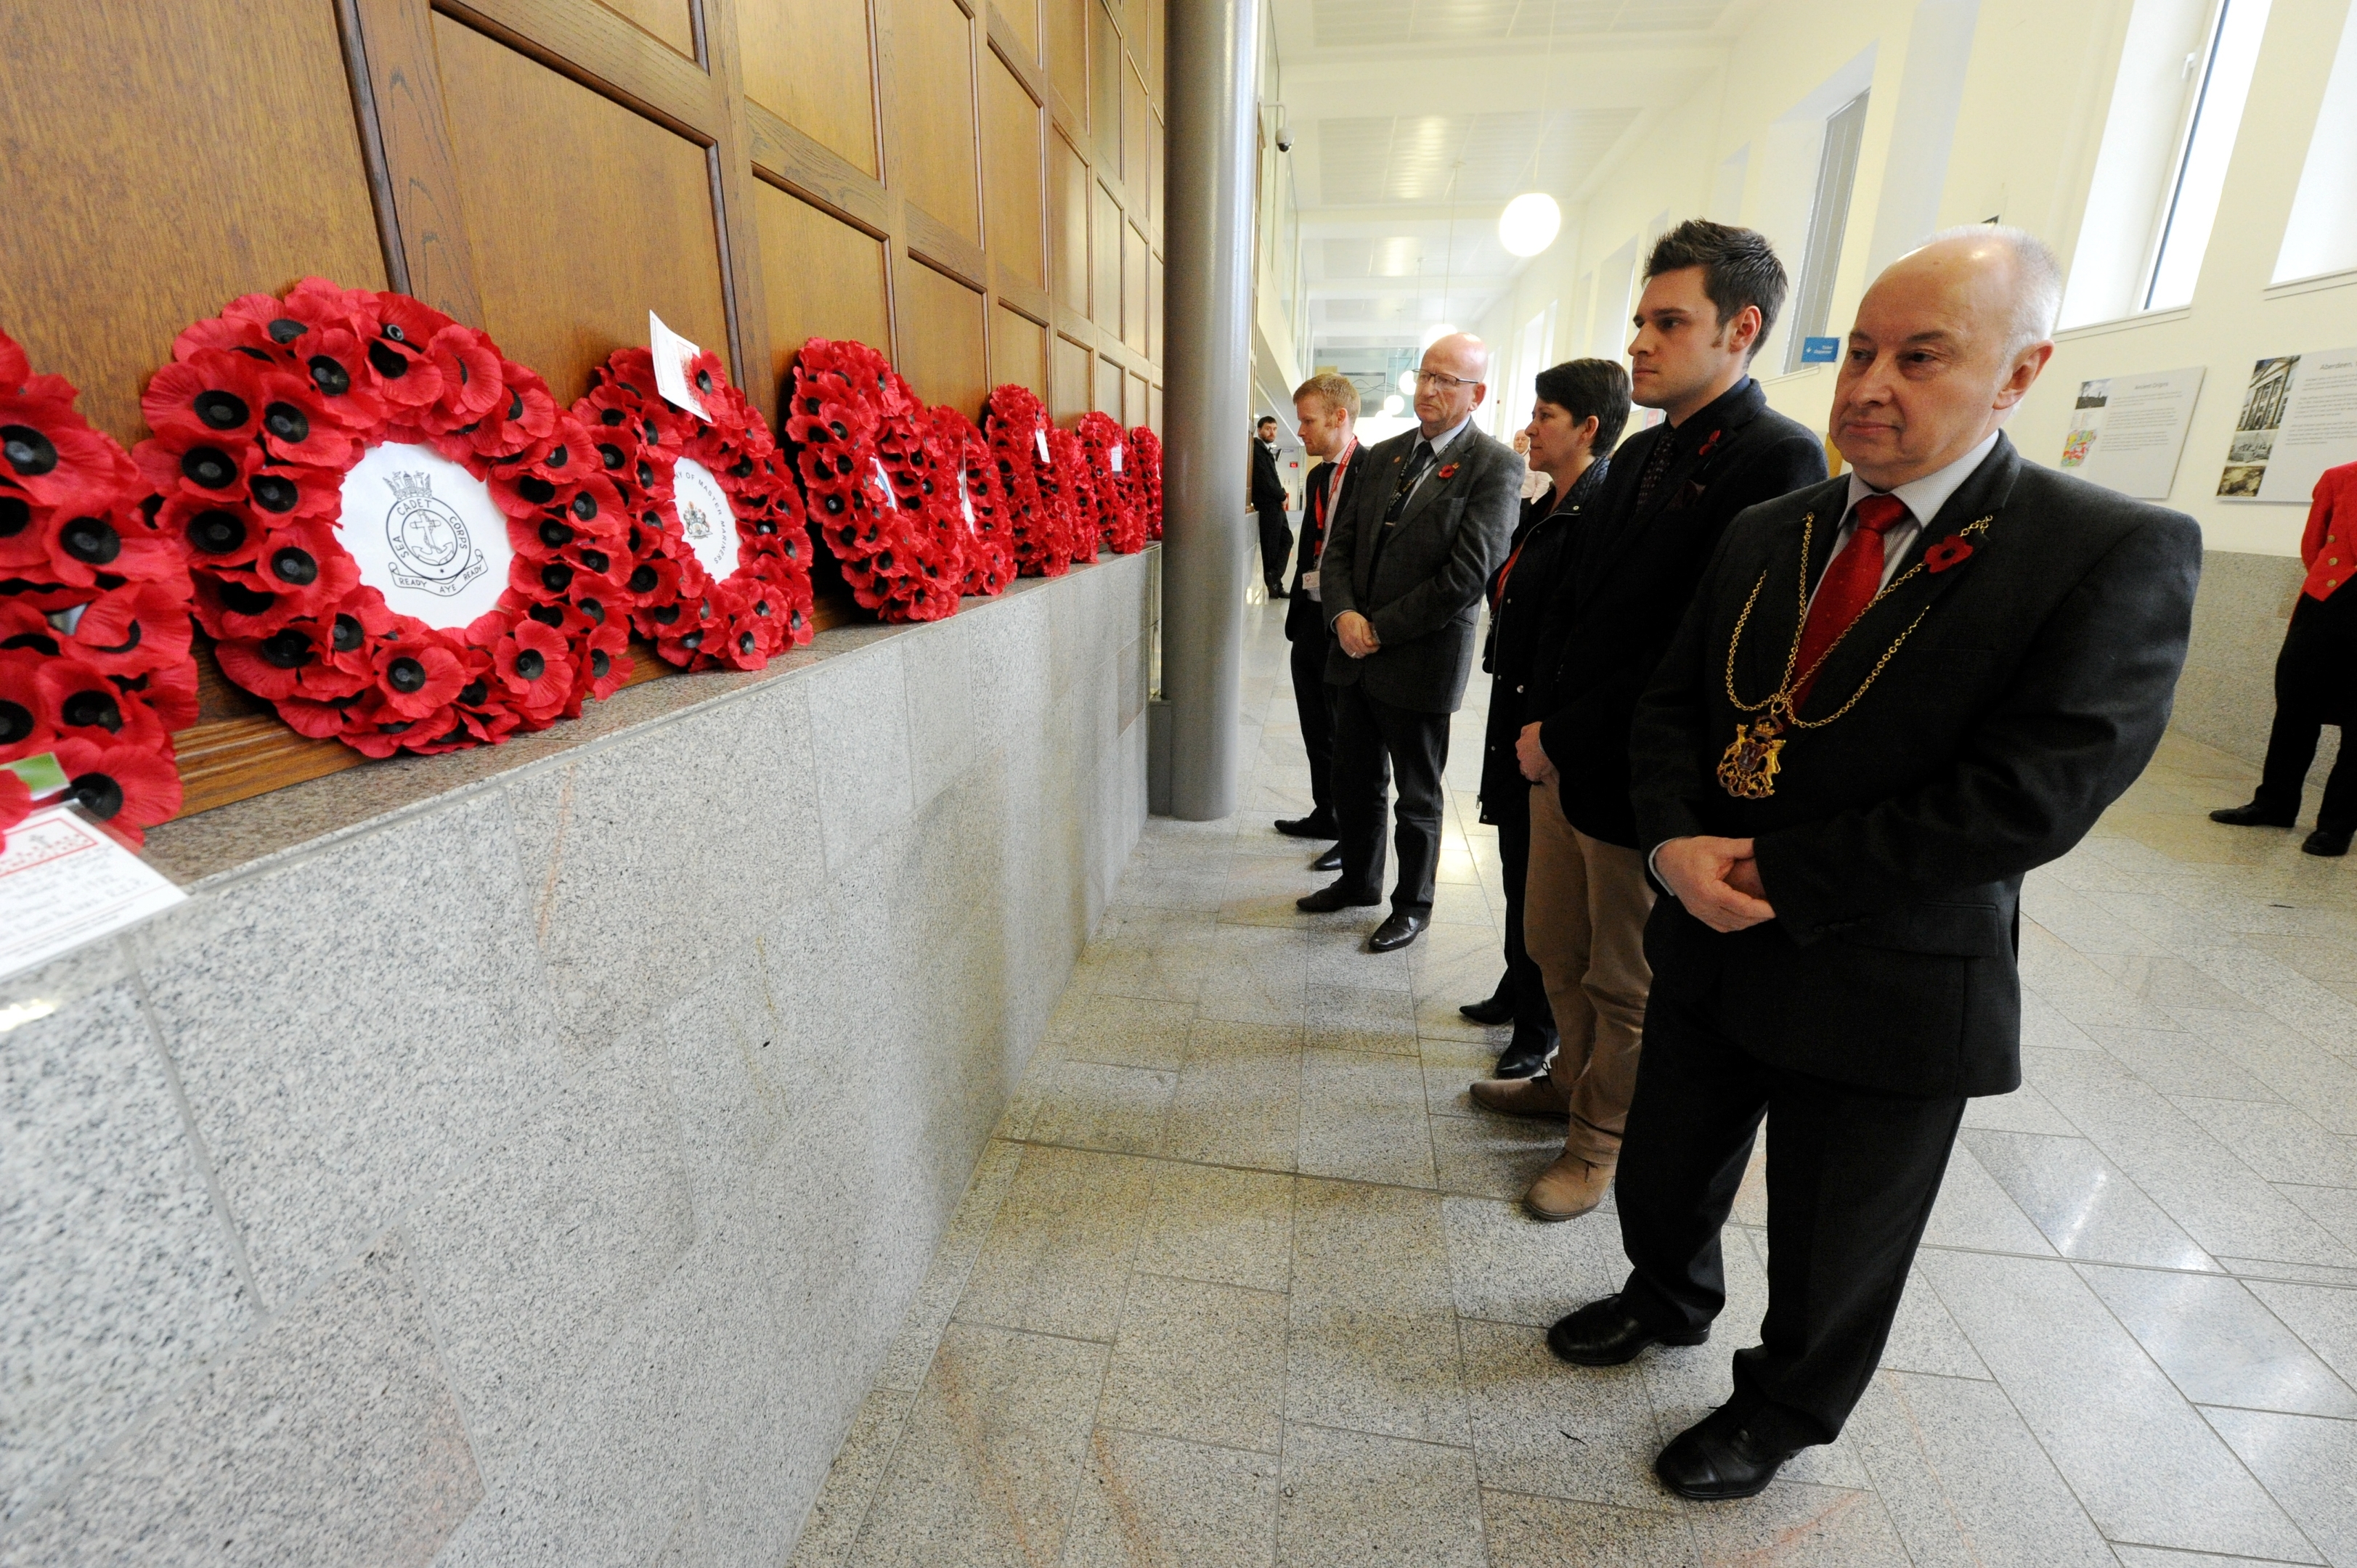 Aberdeen Lord Provost George Adam joined council staff and members of the public at Marischal College customer service area to remember the nation's war dead, and observe the national two-minute silence. Picture by KENNY ELRICK 11/11/2015